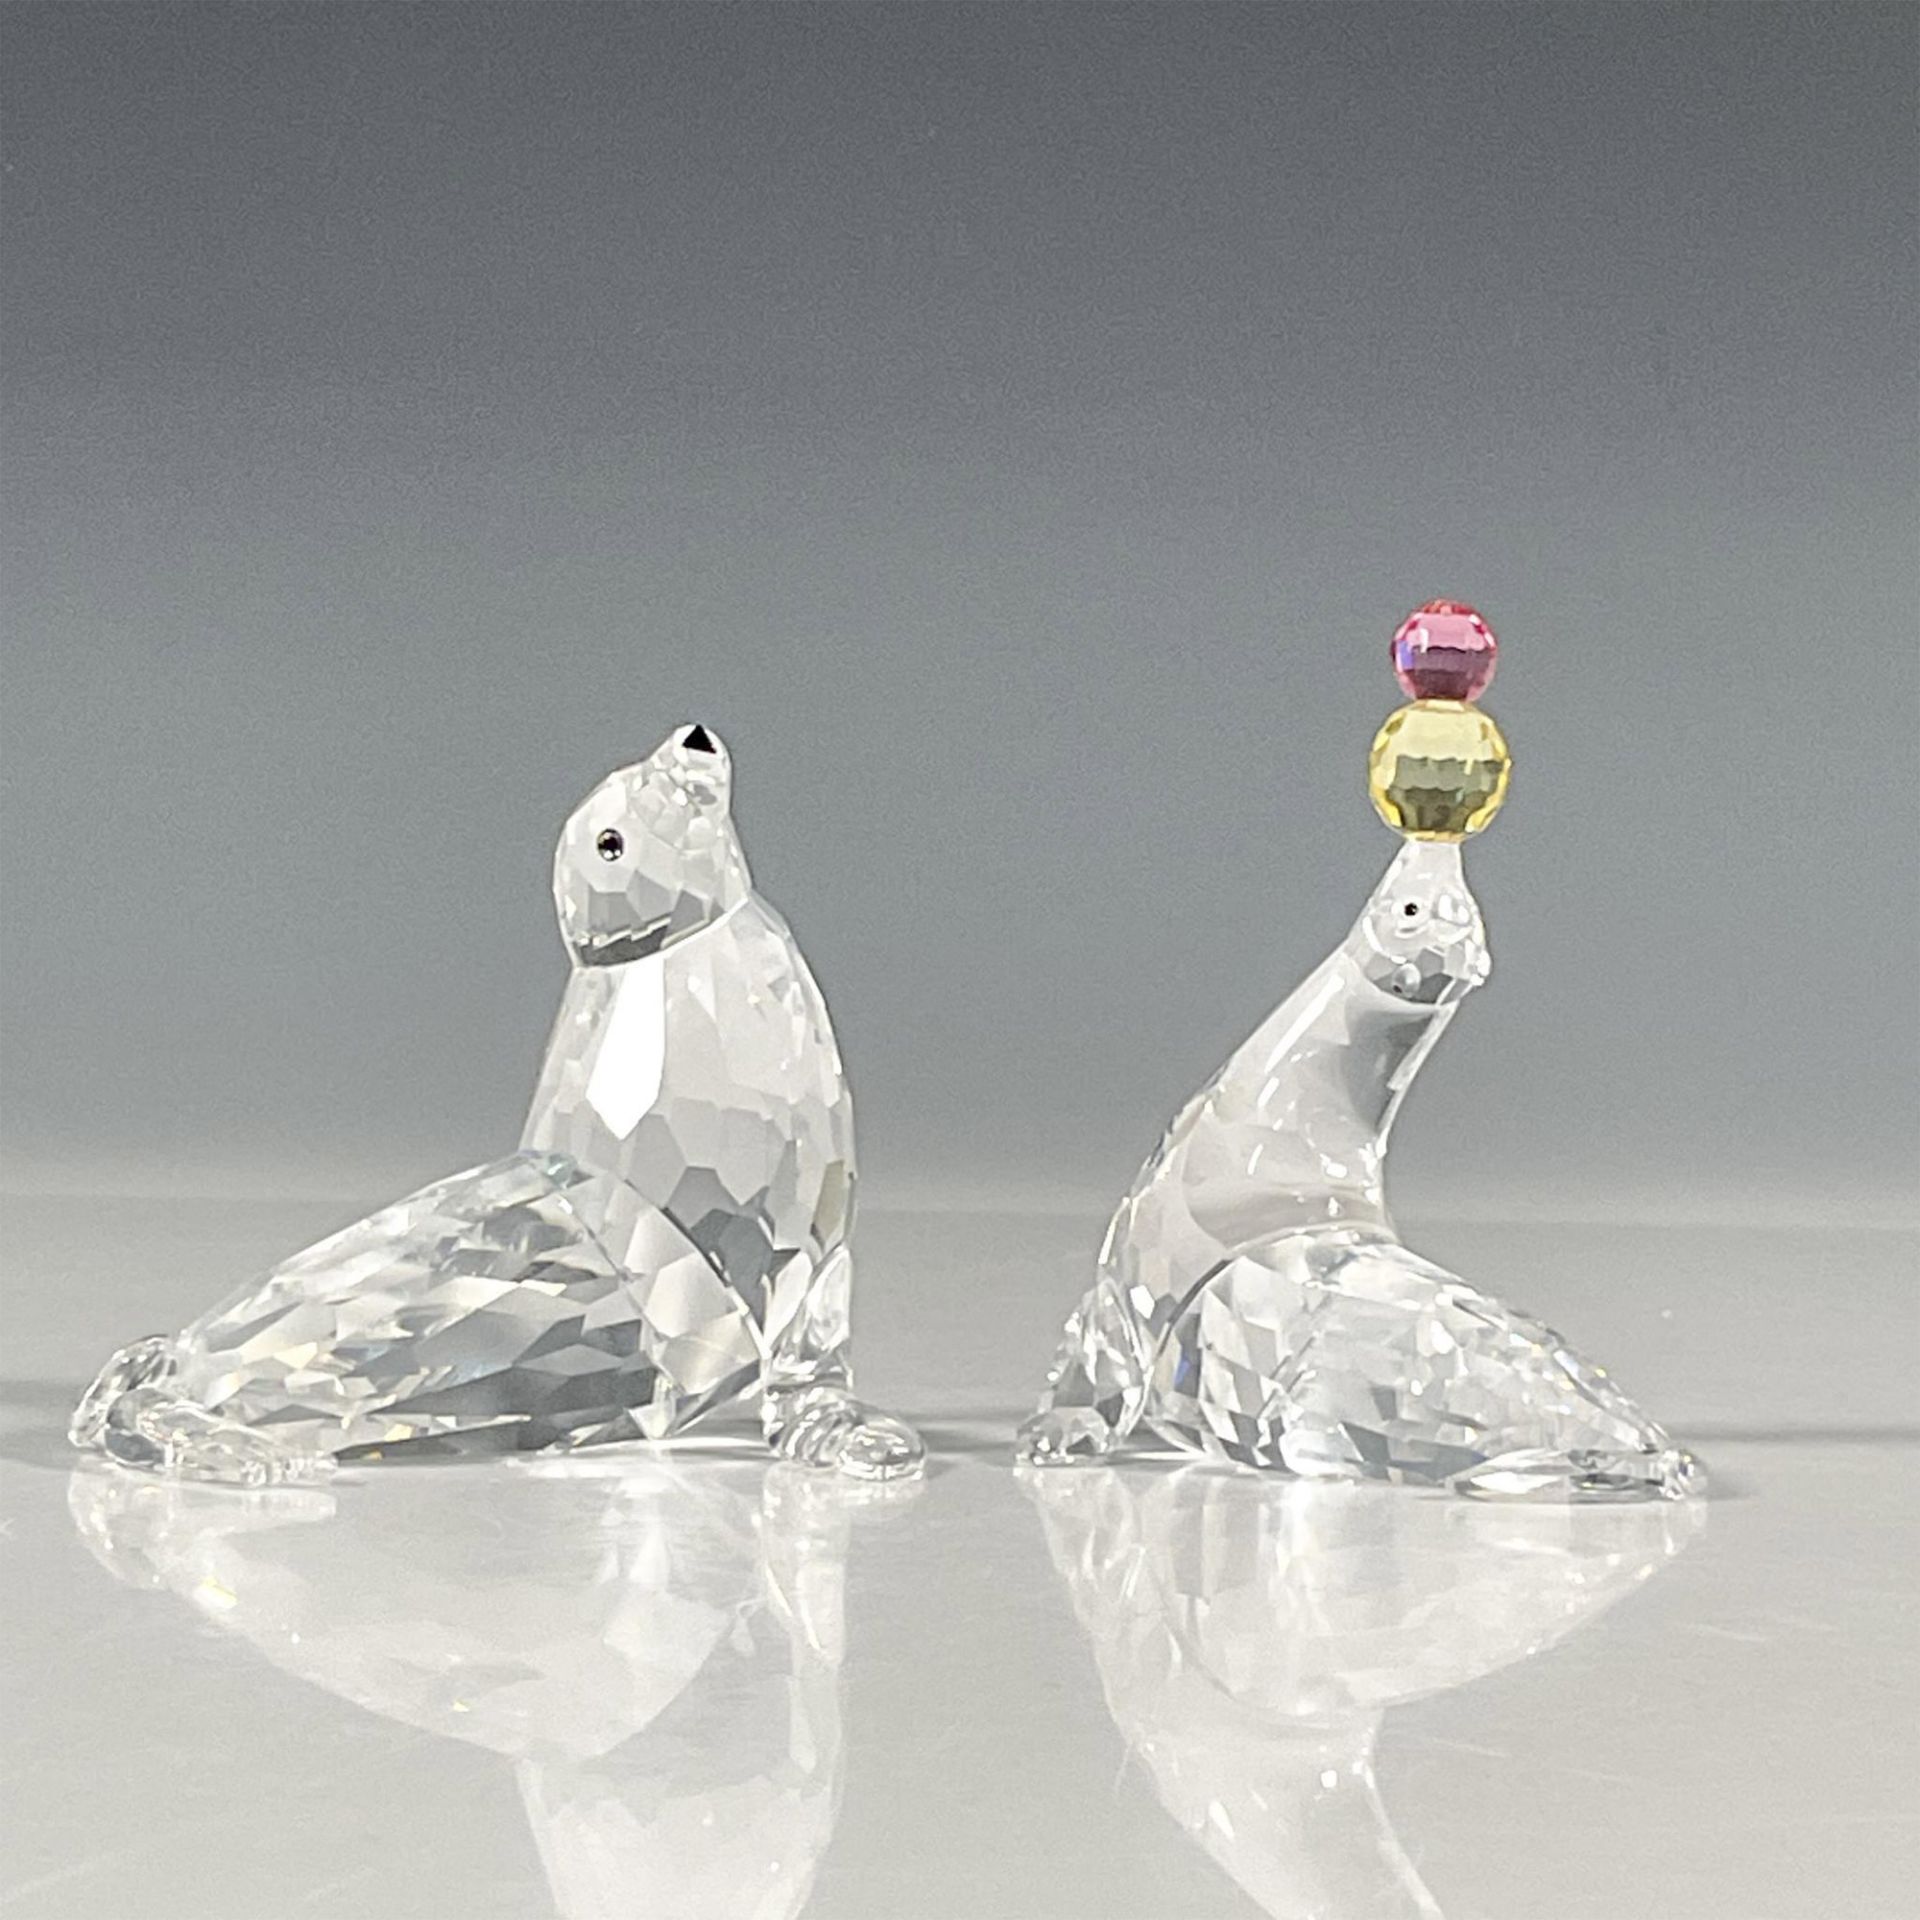 2pc Swarovski Silver Crystal Figurines, Seal and Sealion - Image 2 of 5